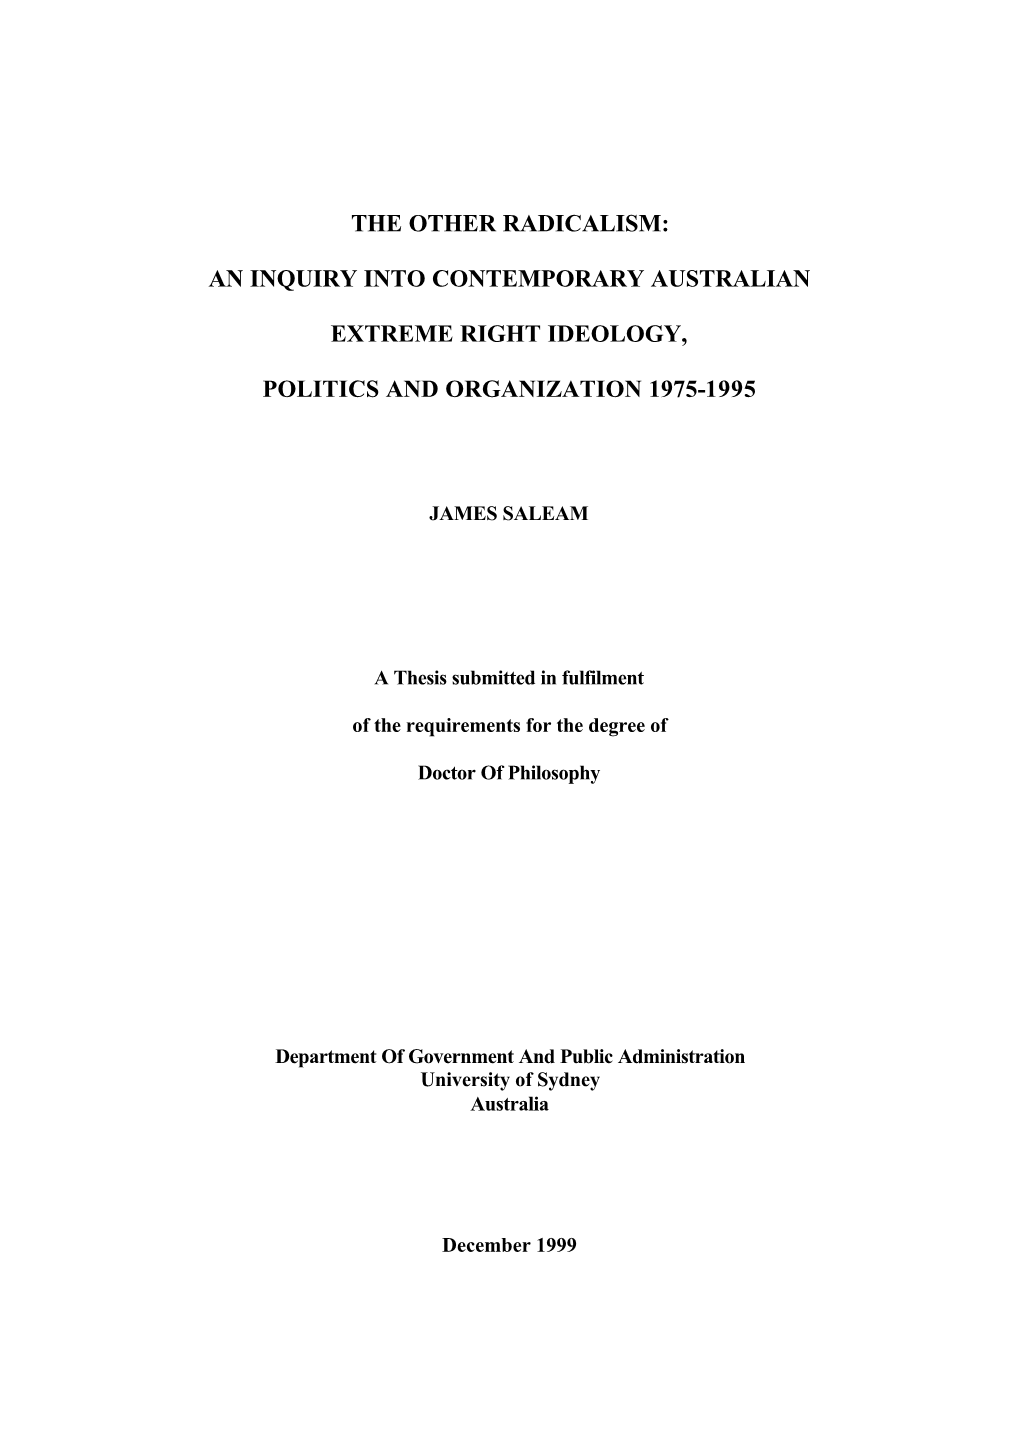 An Inquiry Into Contemporary Australian Extreme Right